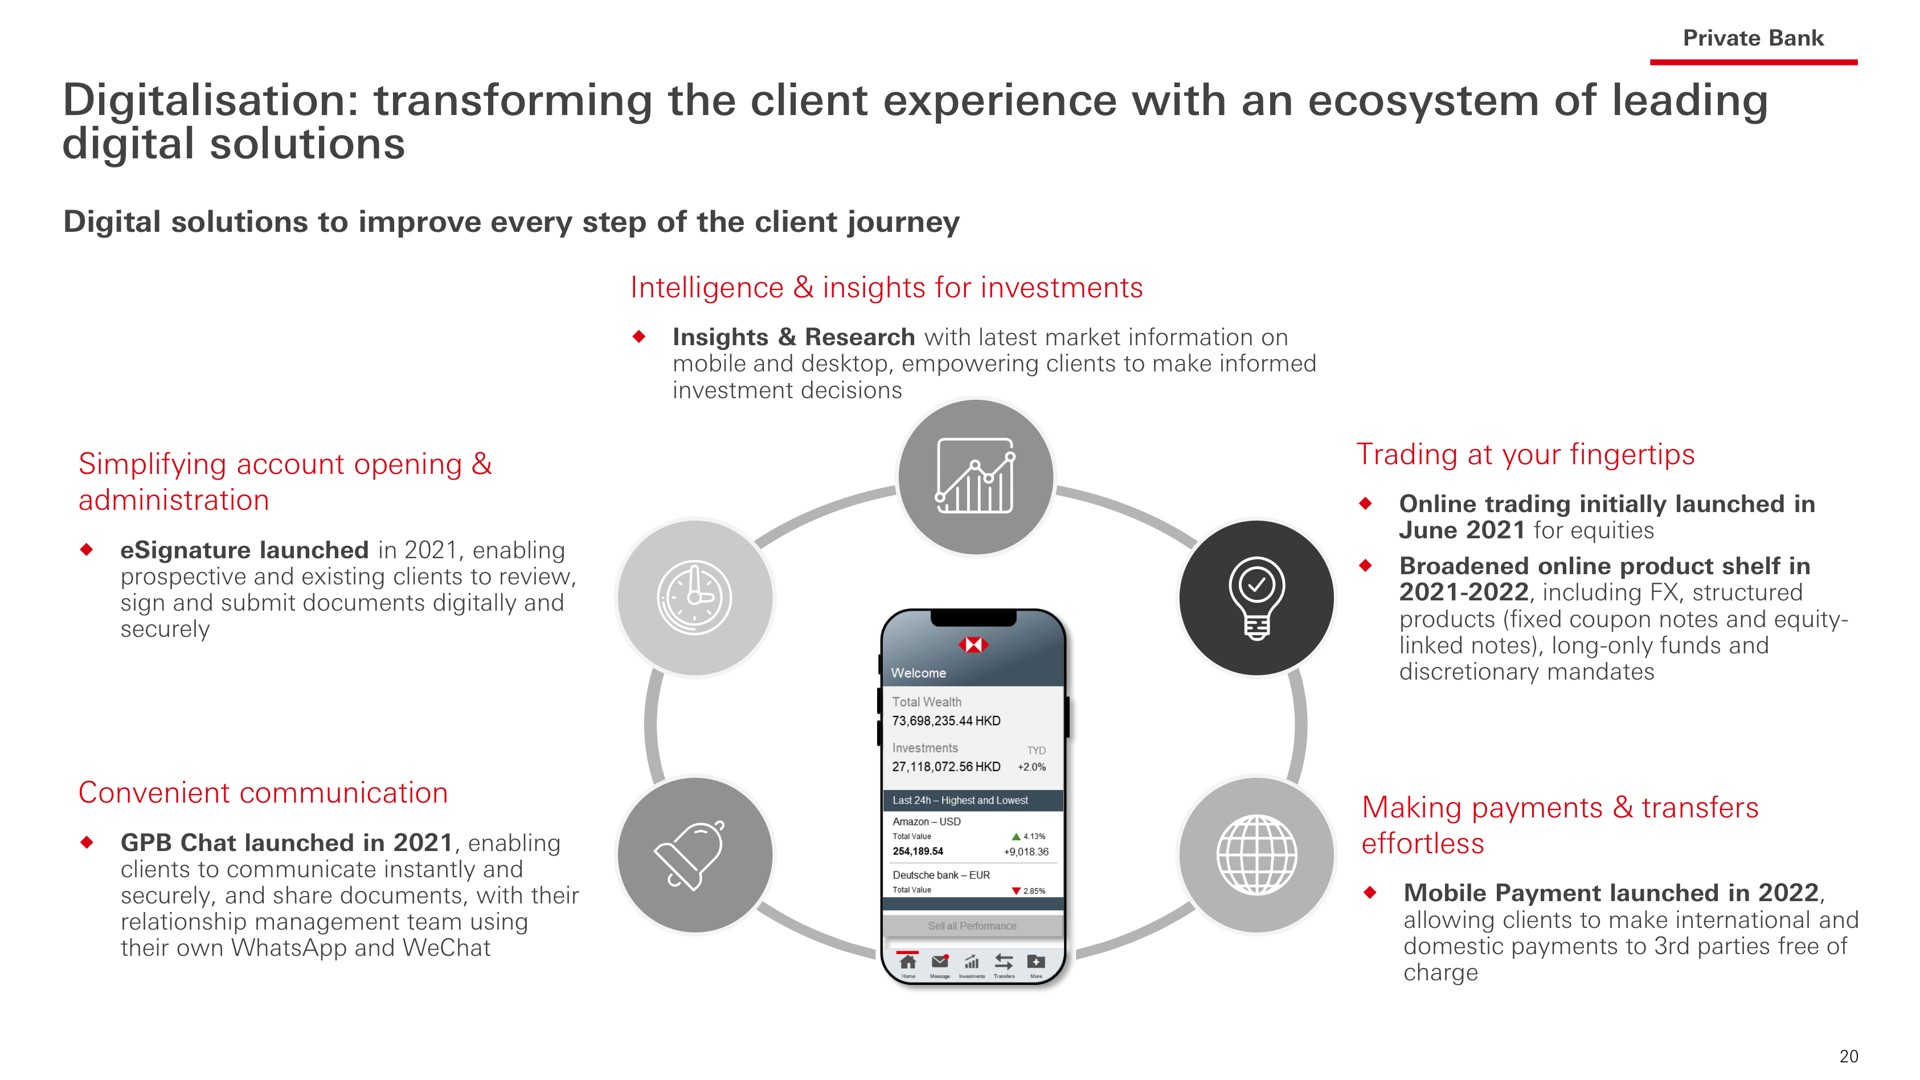 transforming the client experience with an ecosystem of leading digital solutions | HSBC